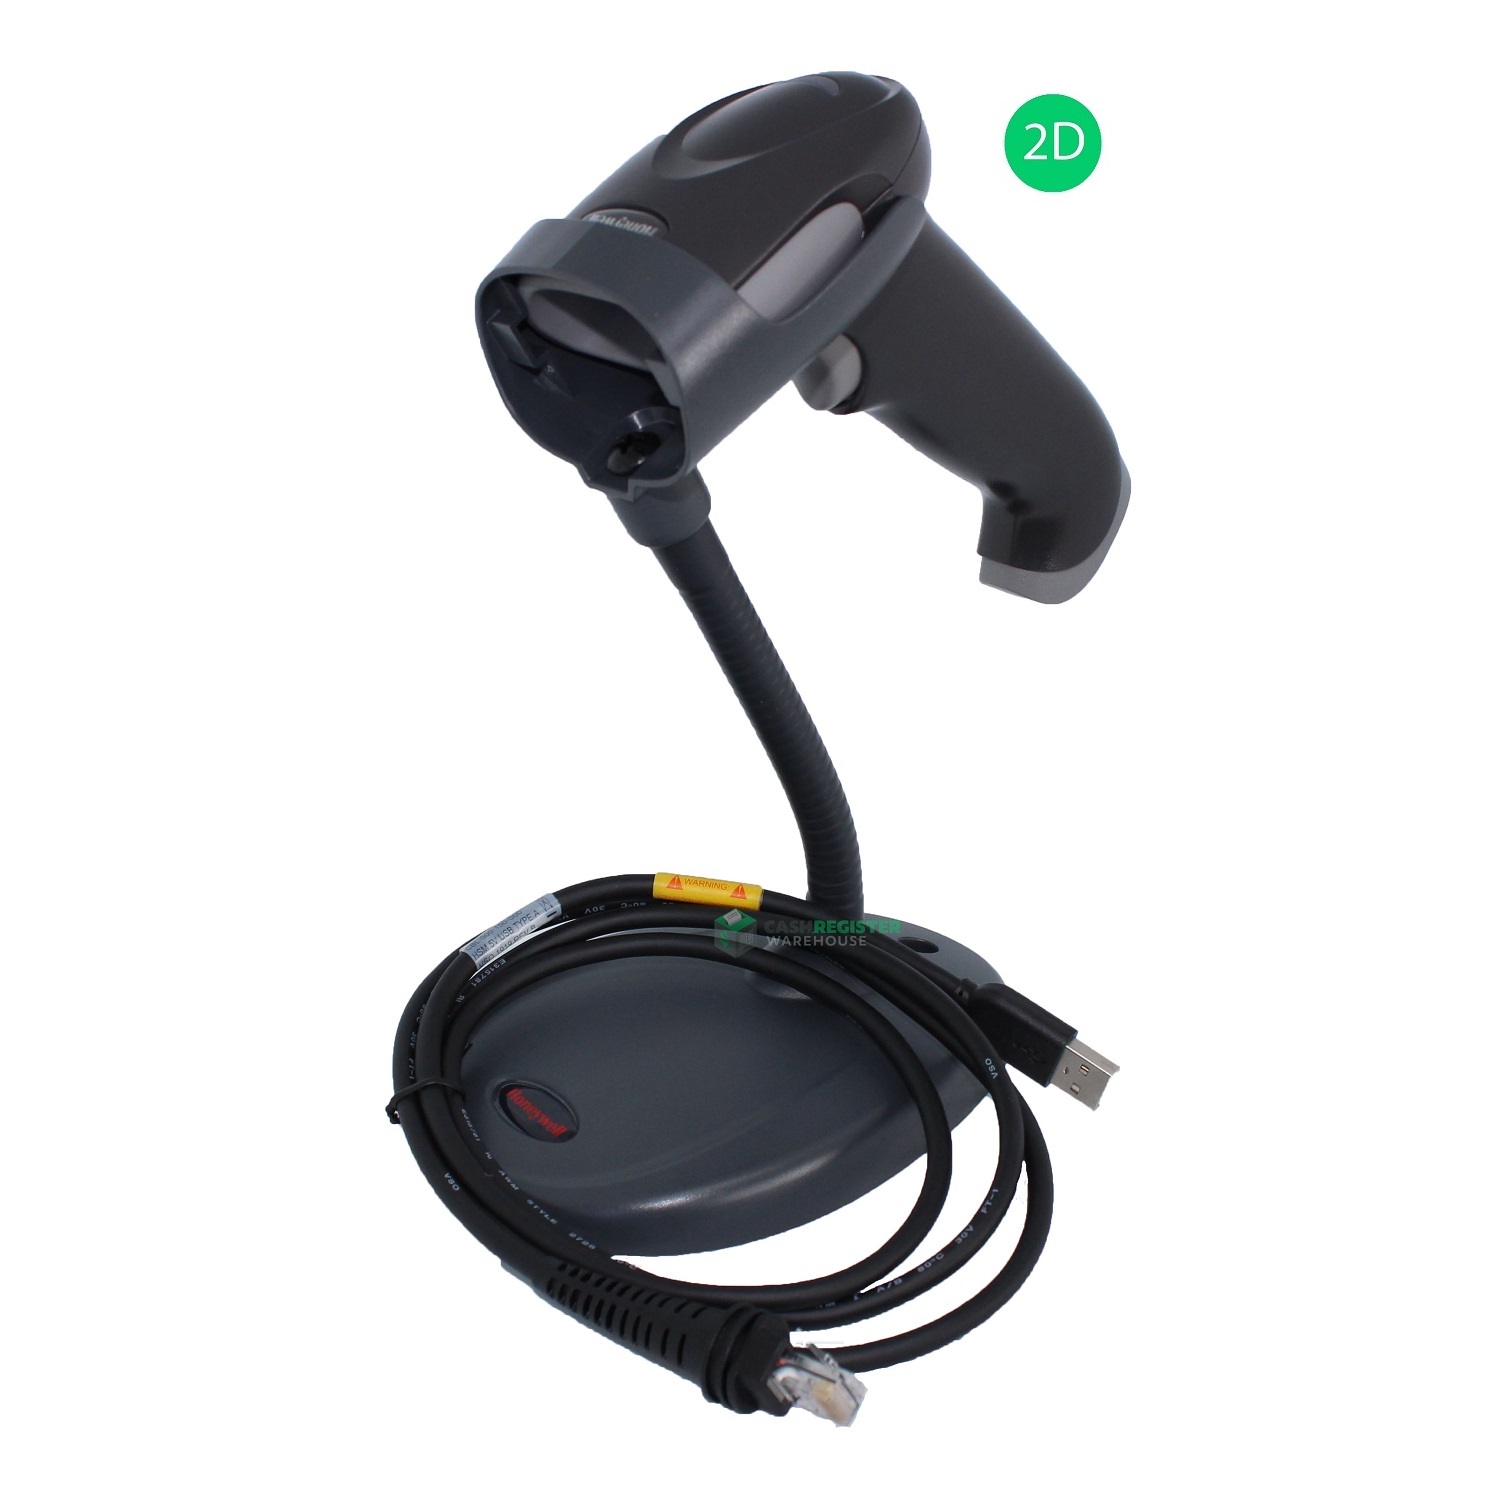 Honeywell 1470G Barcode Scanner with USB